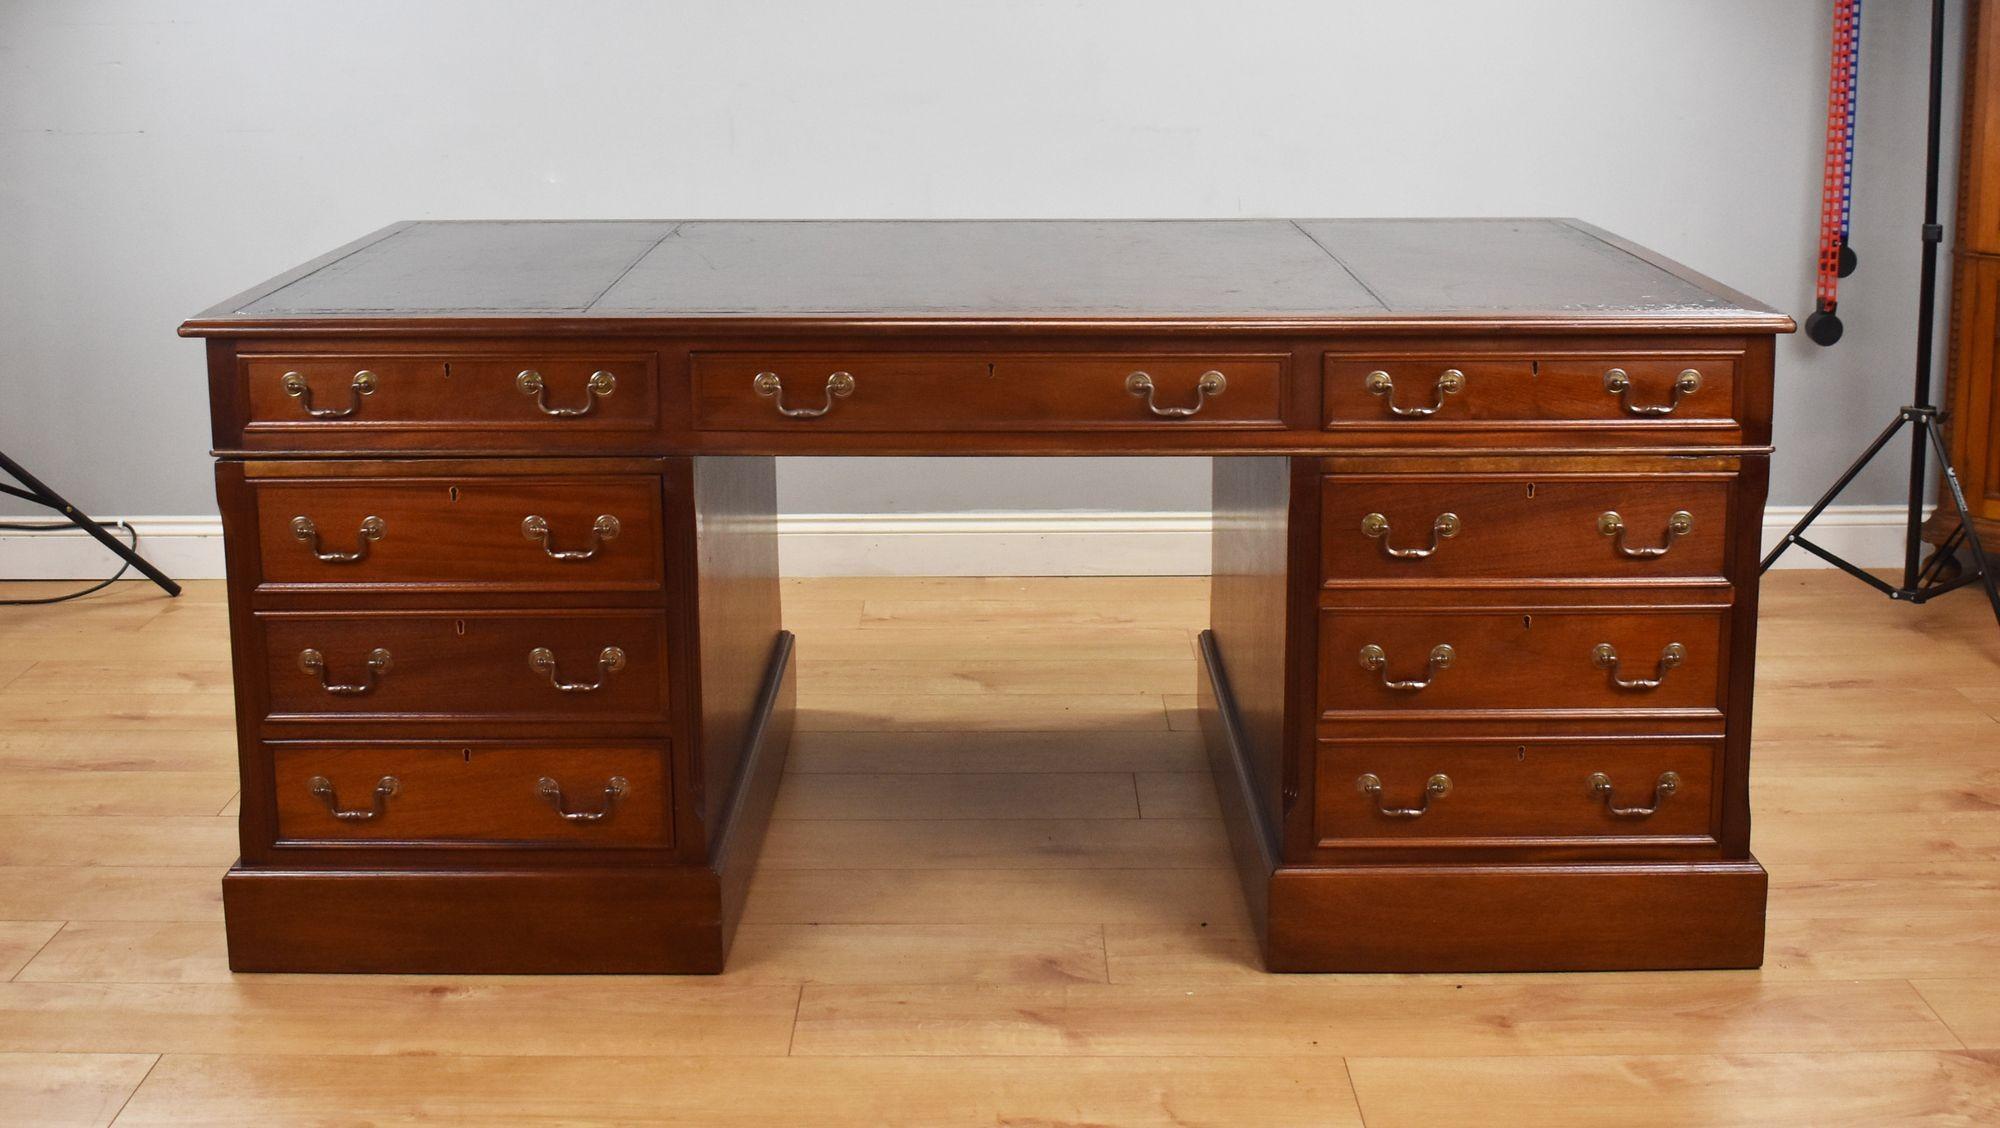 For sale is a good quality large mahogany partners desk, having an inset leather writing surface, decorated with black tooling, above three drawers in the front, with three further drawers on the opposing side. The top fits on to two pedestals, each